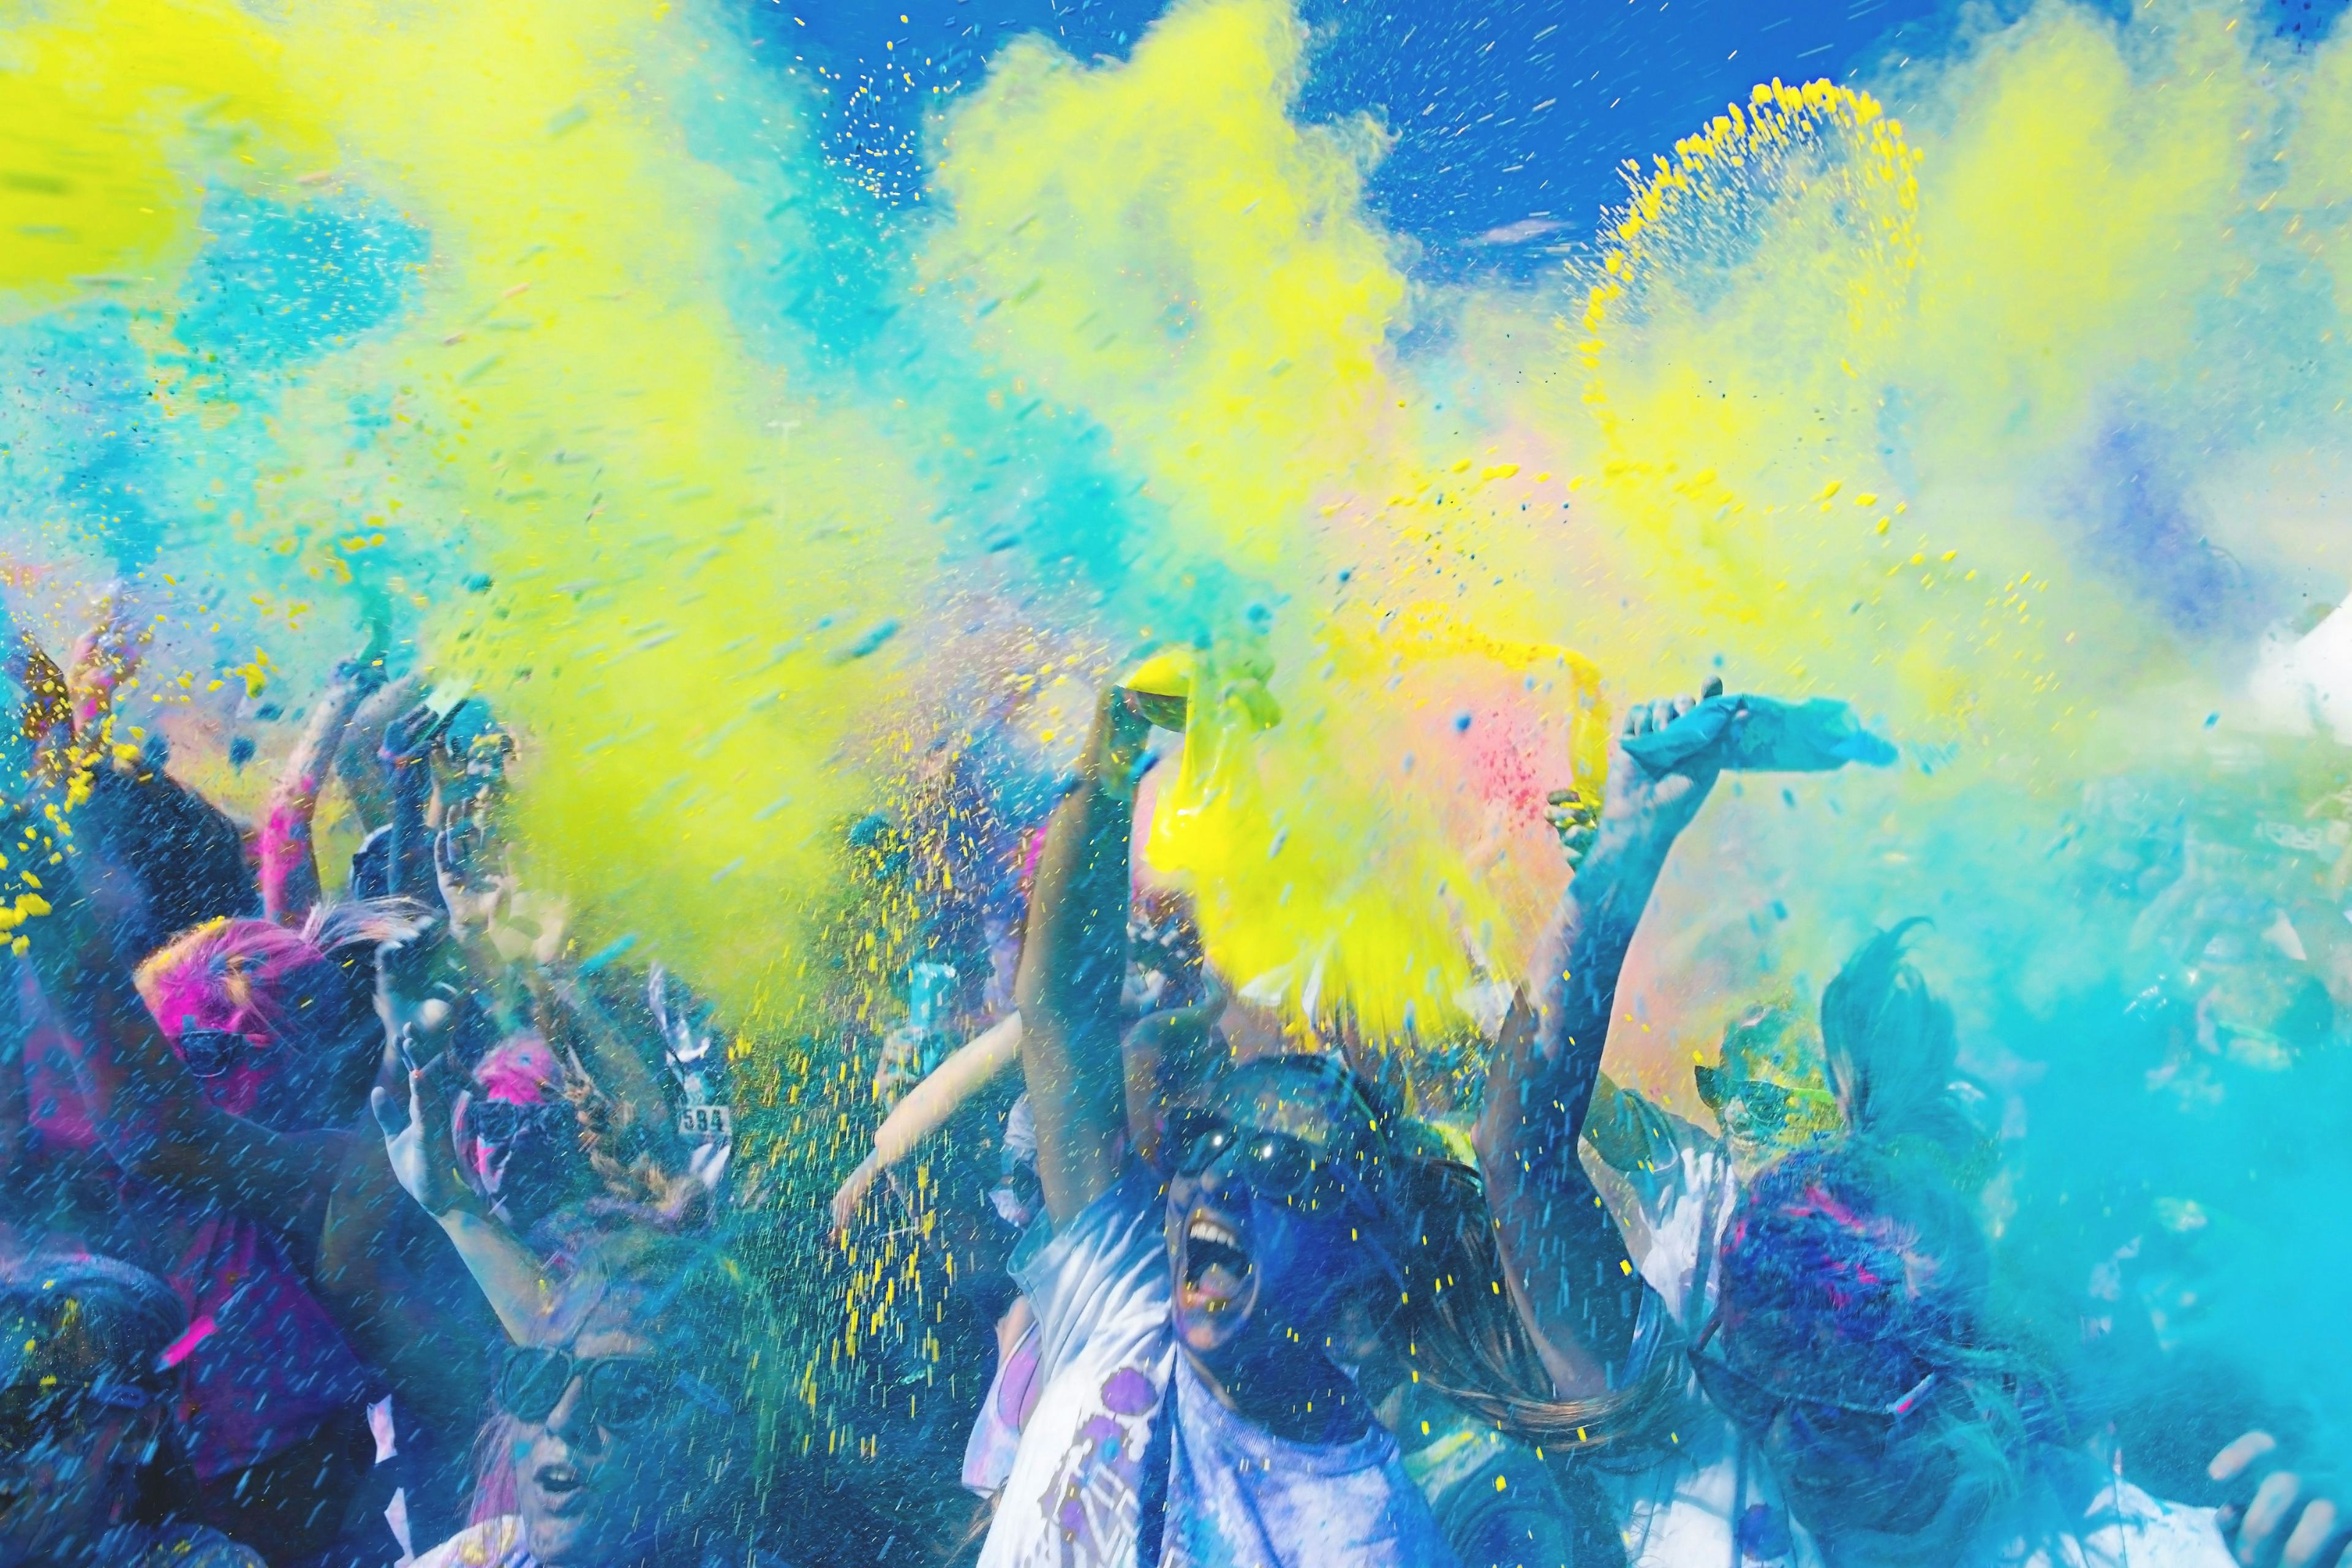 Large group of people covered in colorful powders with clouds of teal and yellow and pink powder filling the air and covering their bodies.